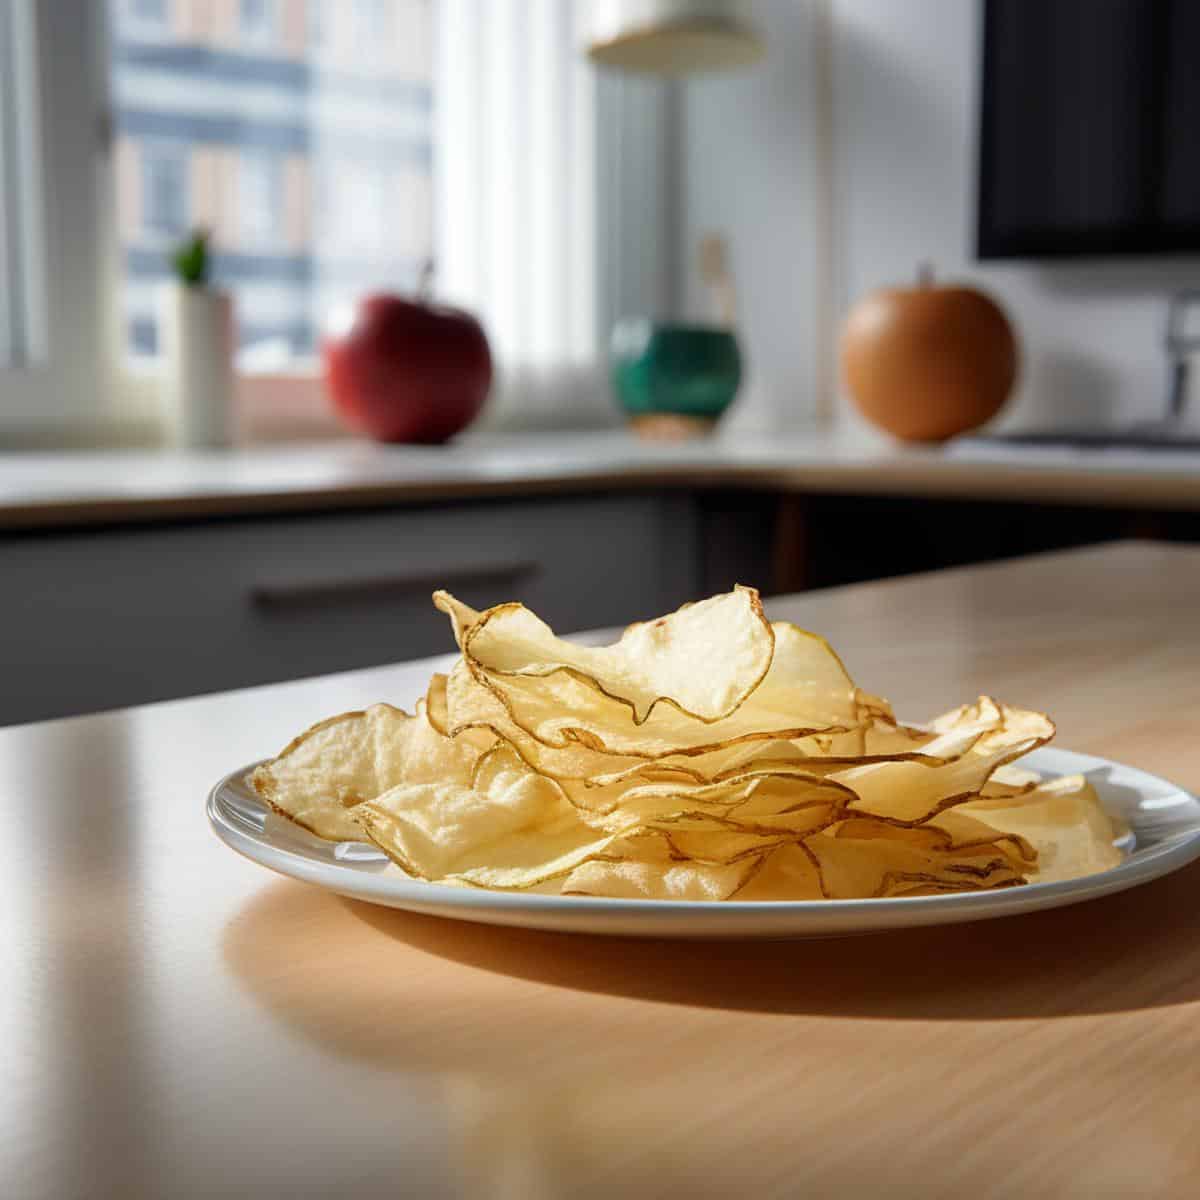 Apple Chip on a kitchen counter